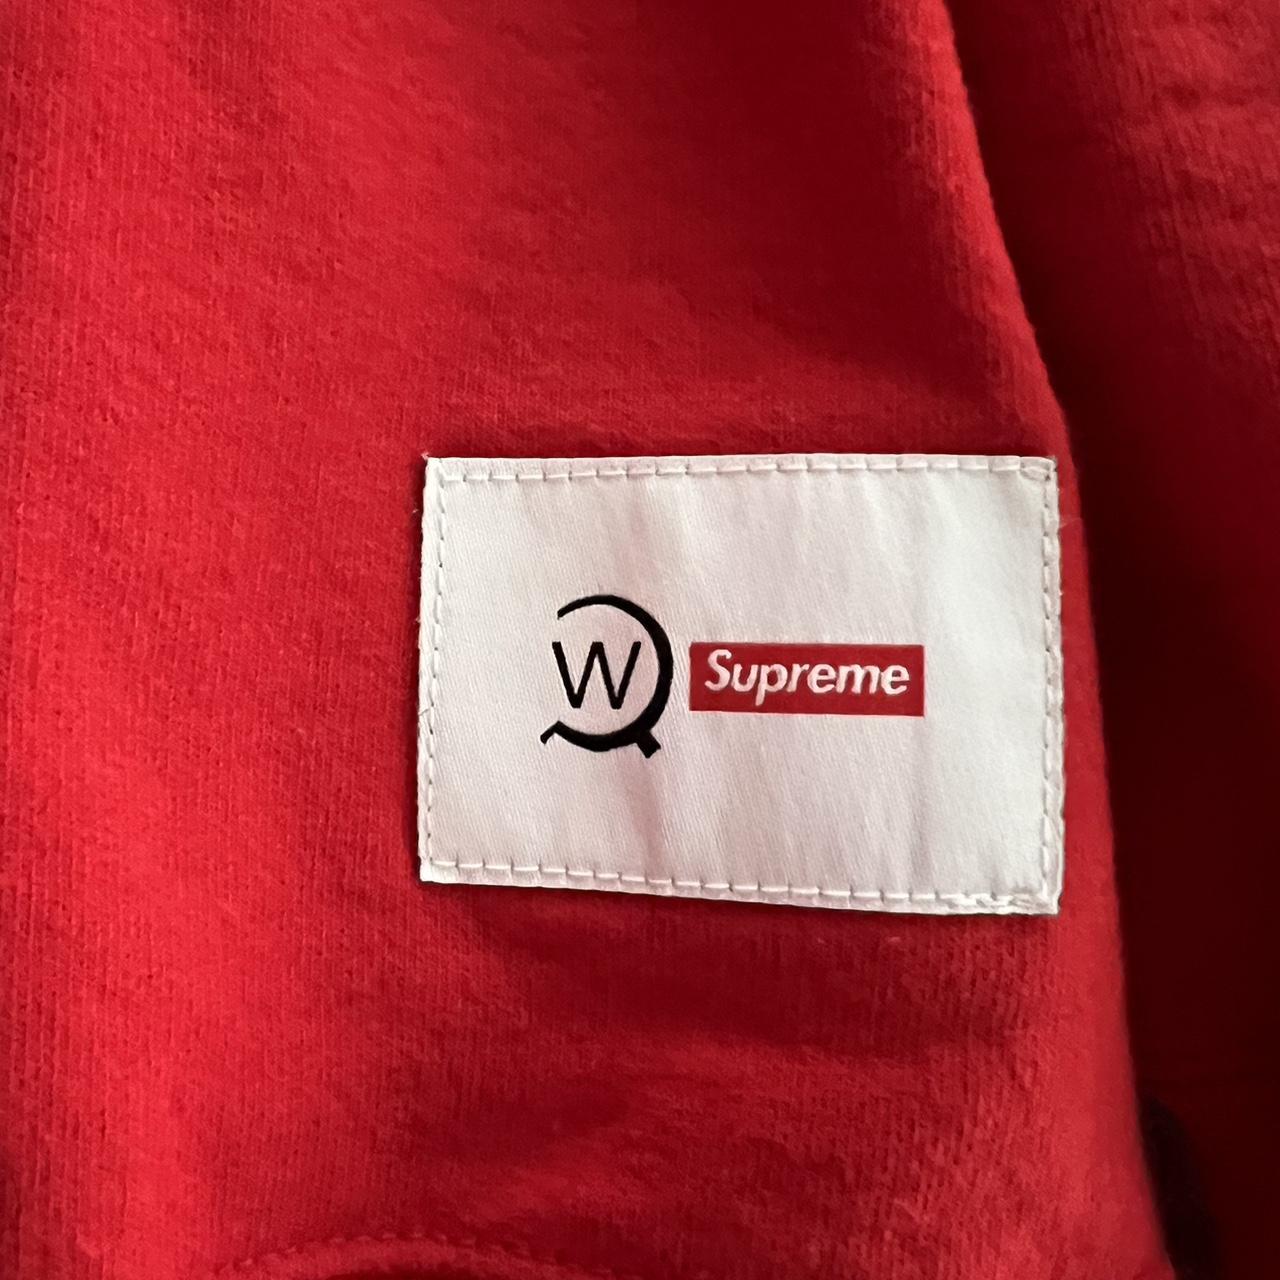 SUPREME X WTAPS CREWNECK RED COLORWAY SIZE XL FROM... - Depop